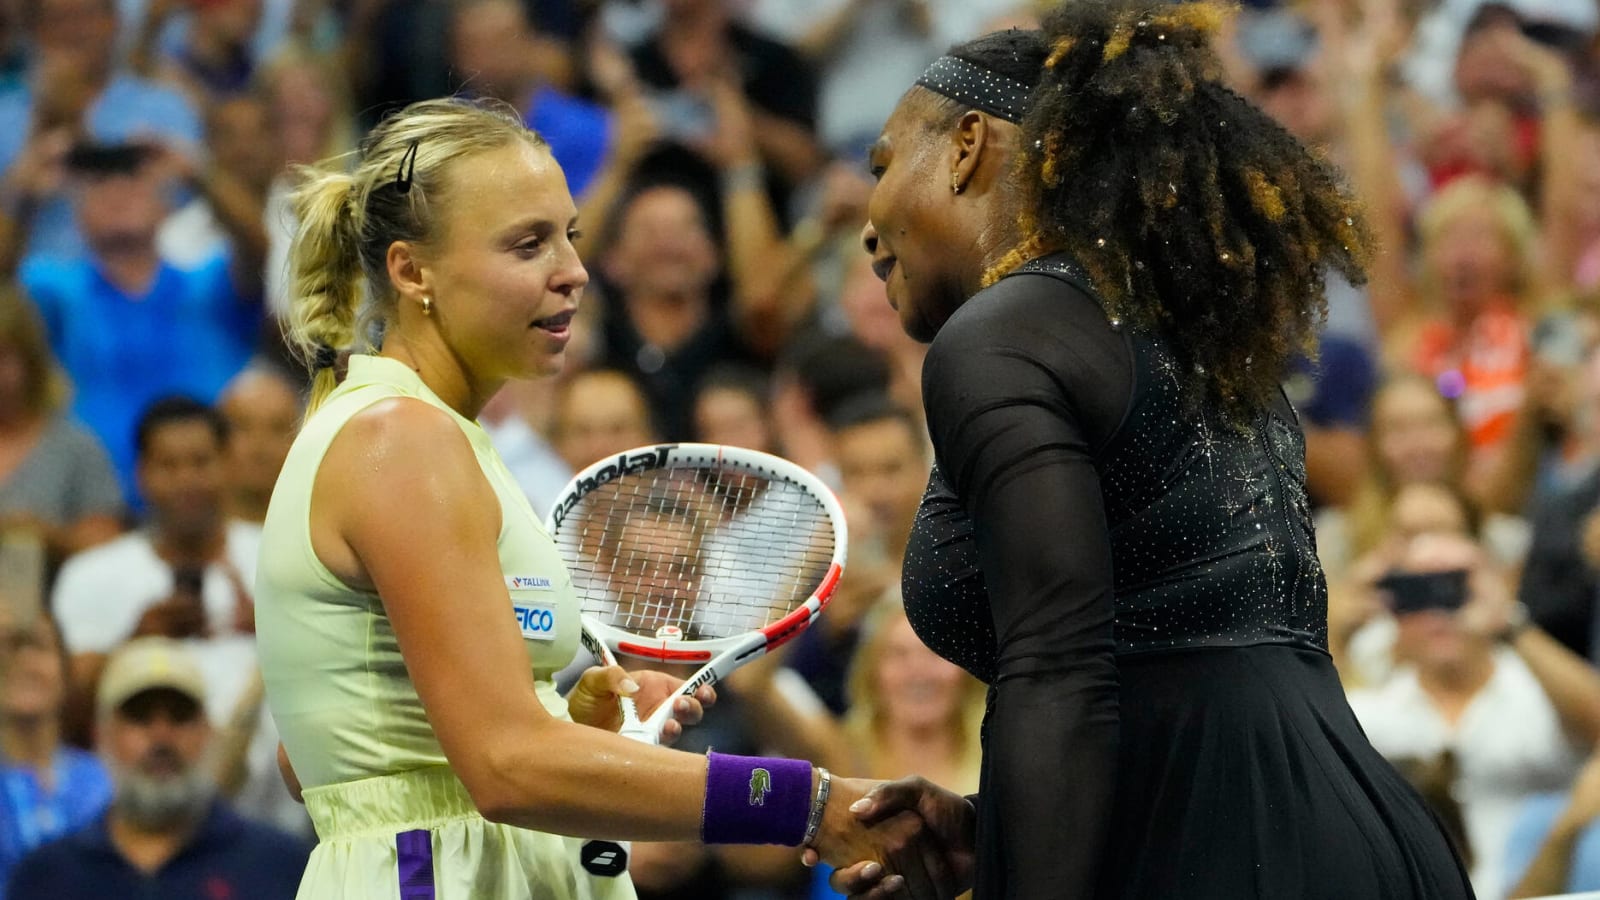 Kontaveit cries, leaves press conference after loss to Serena